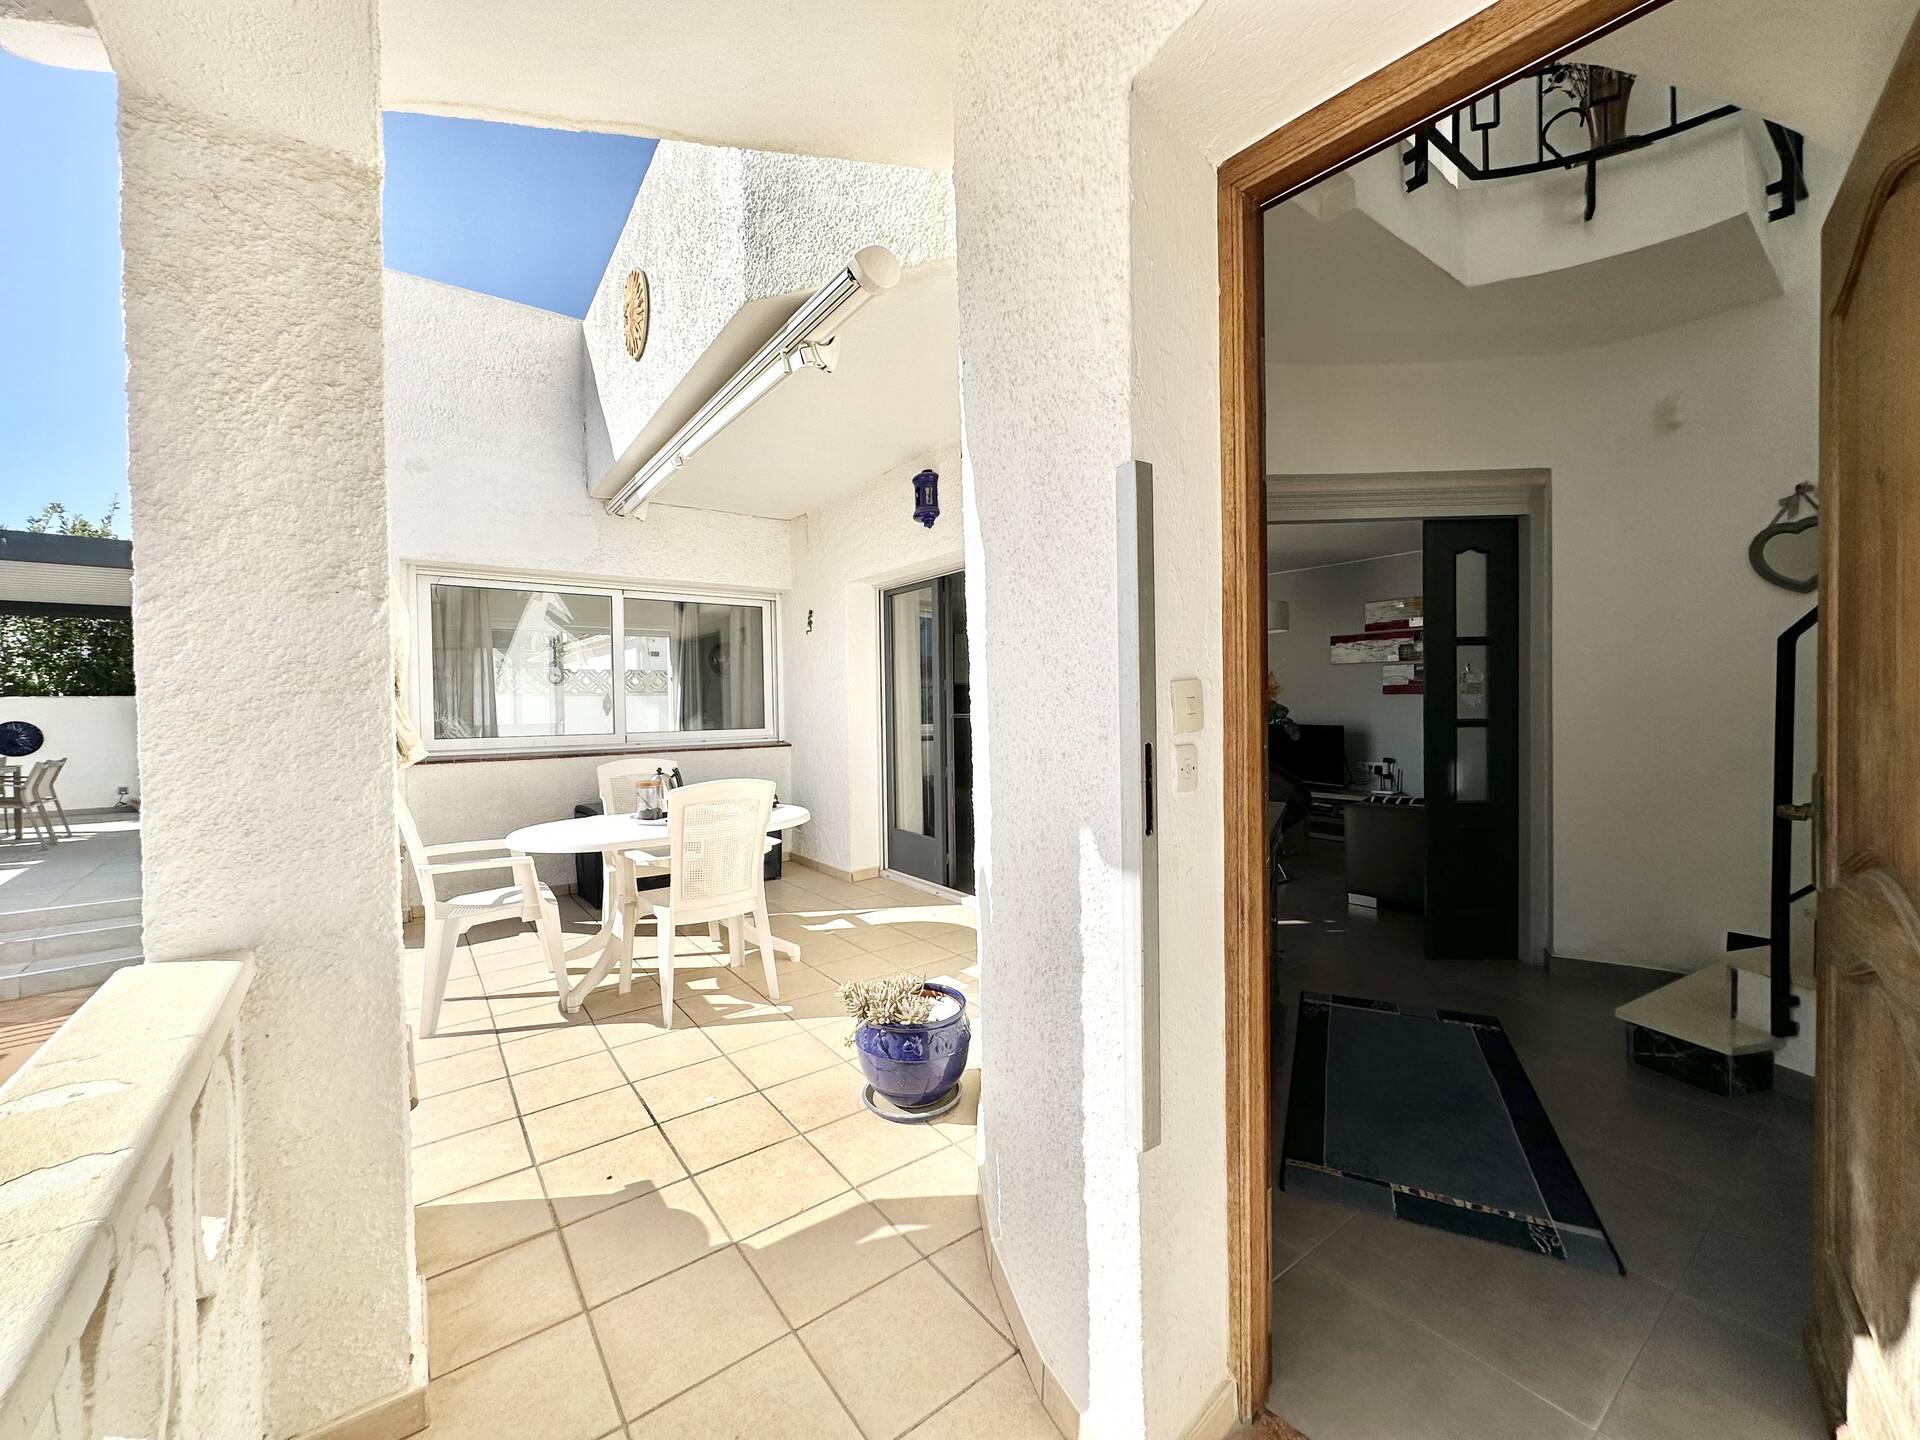 Beautiful villa with pool and garage for sale in Empuriabrava